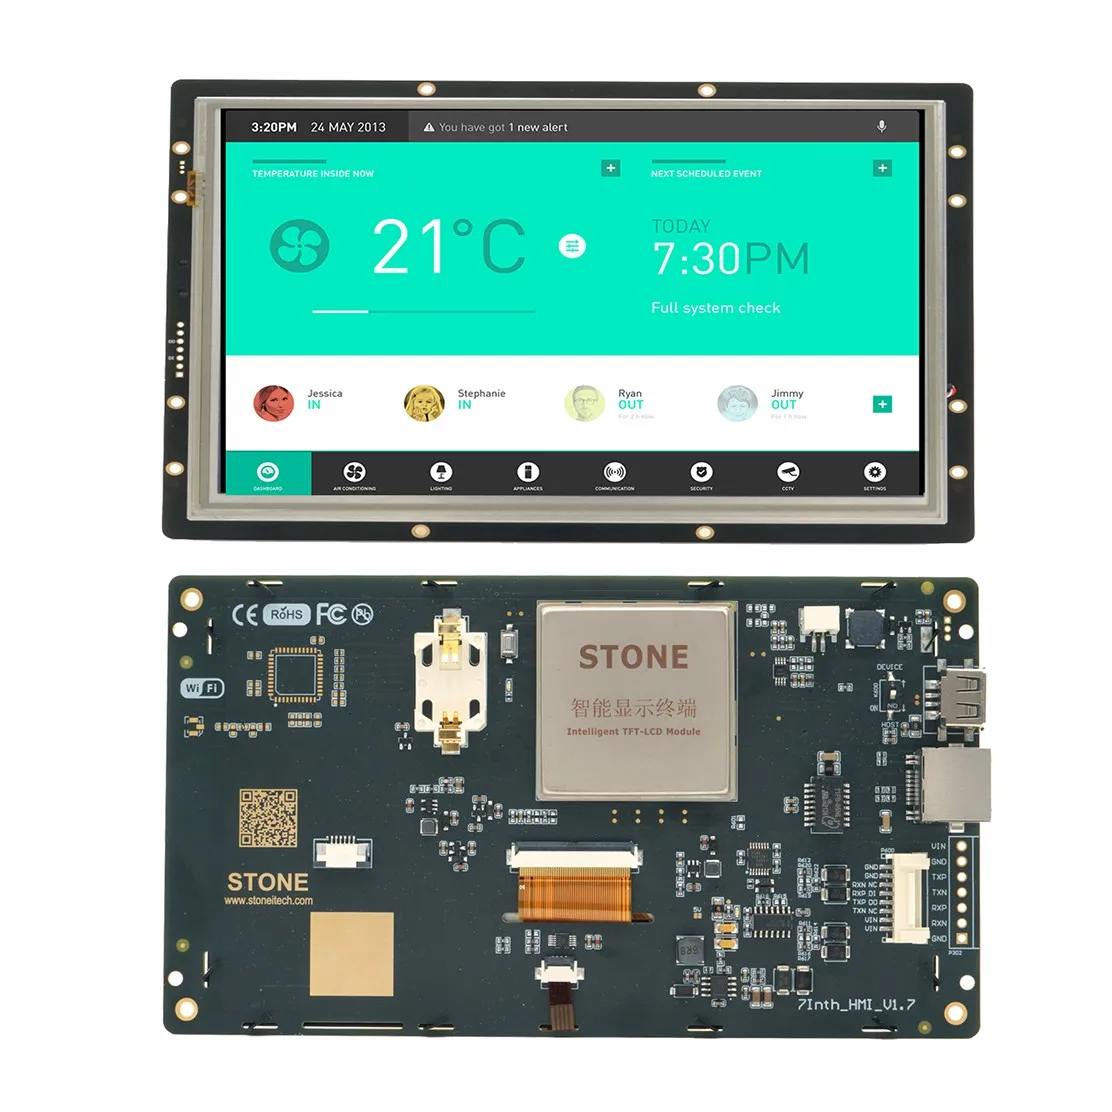 7inch TFT Panel  CPU , TFT Driver design your new project file for Intelligent tft lcd screen on Windows system PC or MacOS PC